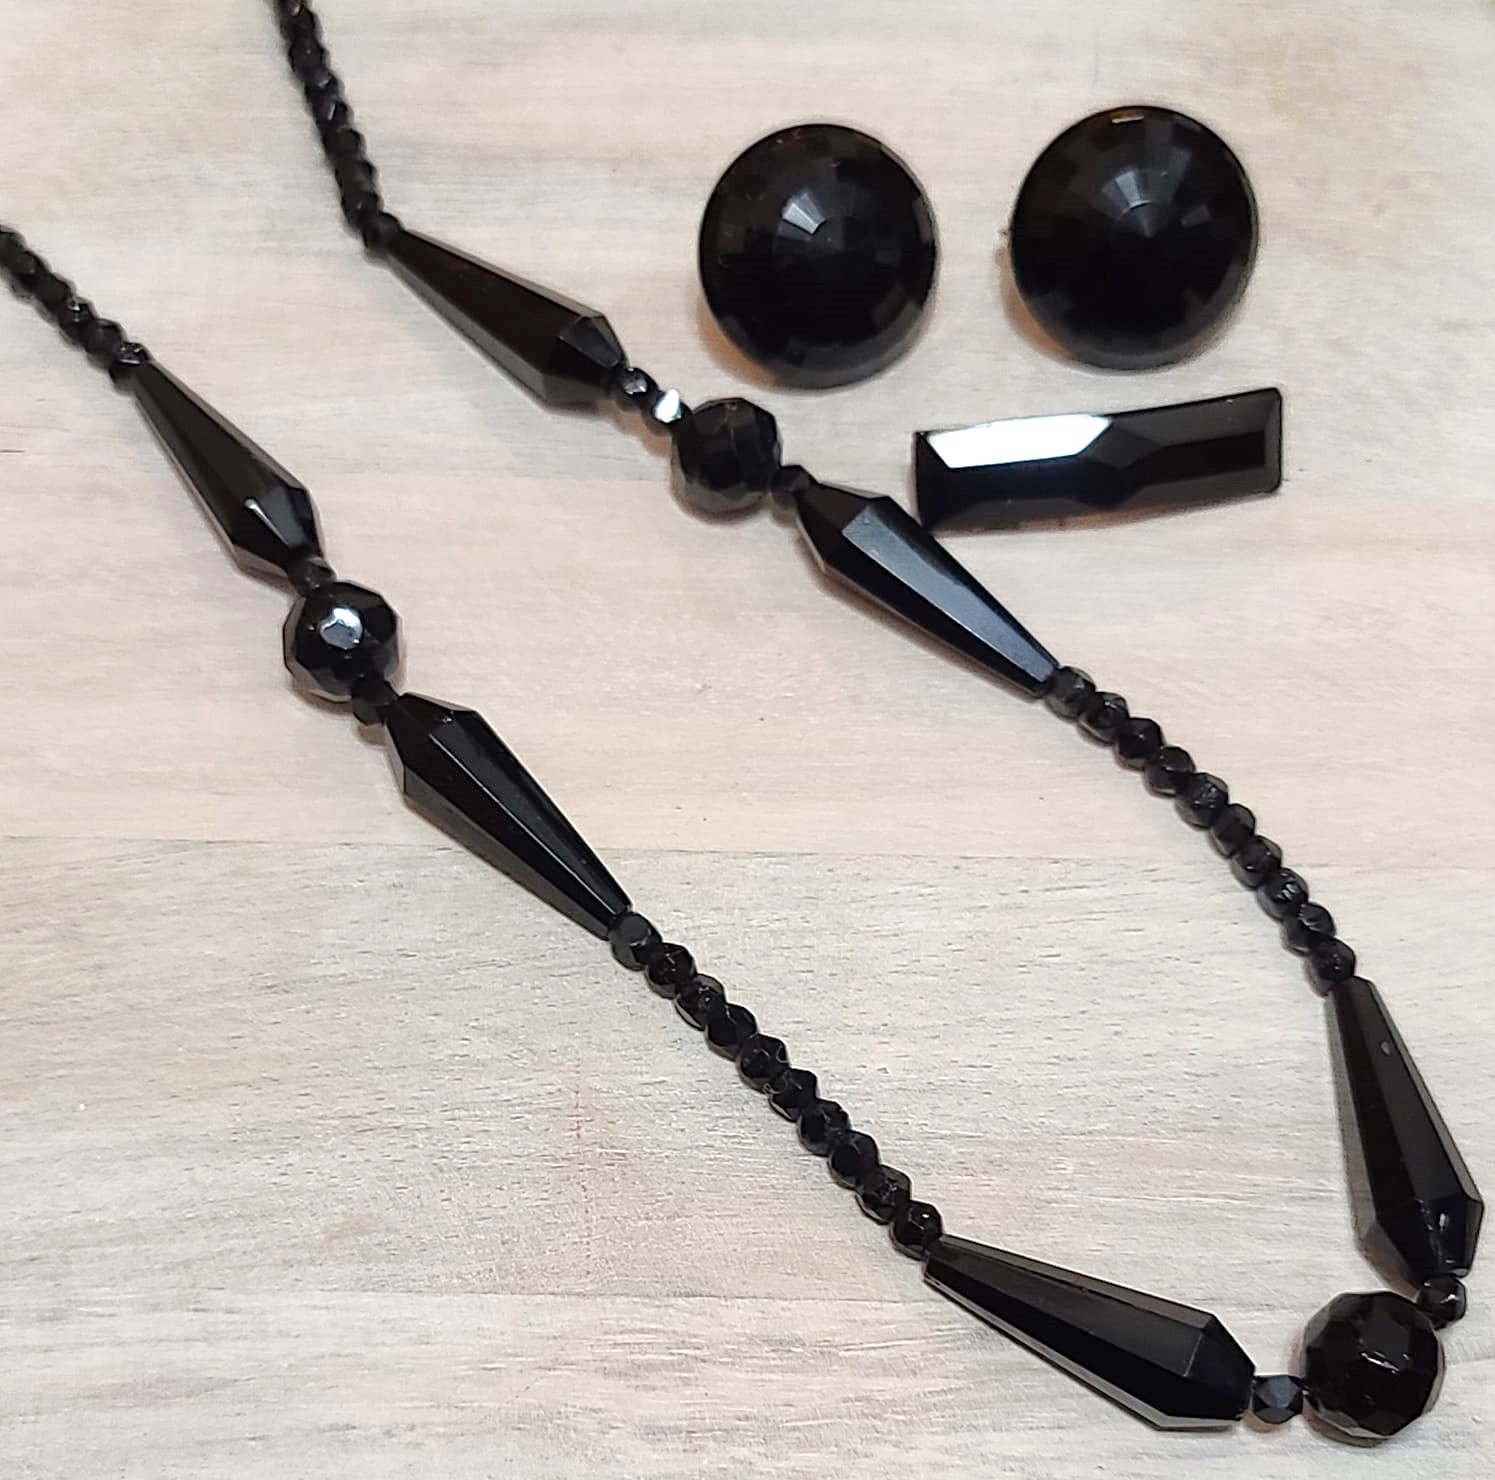 Faceted black glass necklace, earrings & pinand clipon earrings